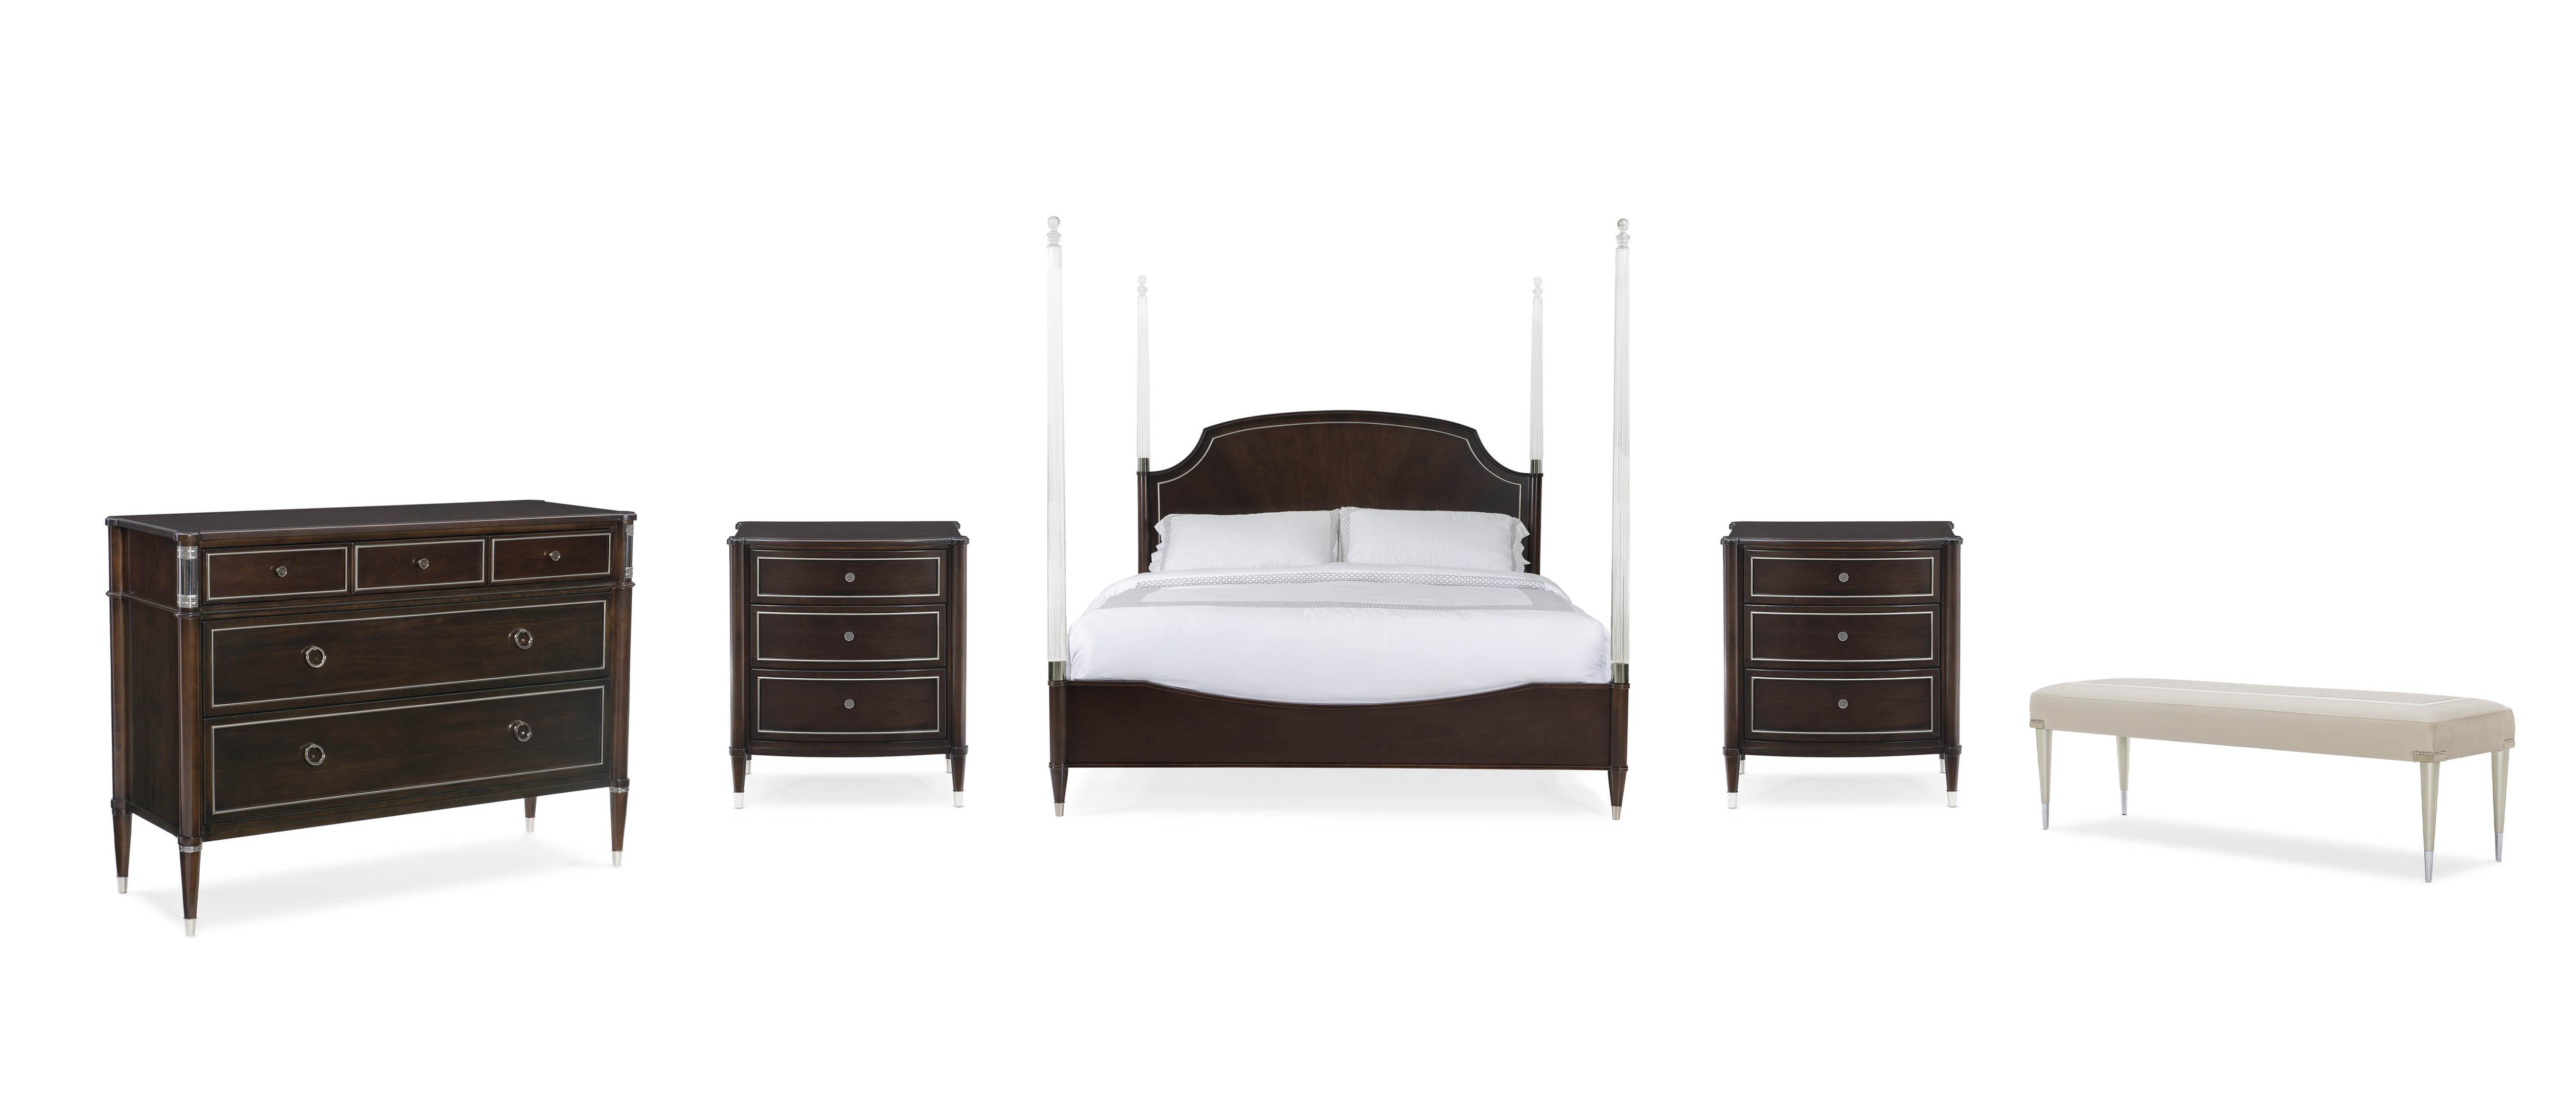 Contemporary Poster Bedroom Set SUITE DREAMS W/POST / SUITE YOURSELF / SUITE MATE / BOARDING ON BEAUTIFUL CLA-420-126-Set-5 in Dark Walnut 